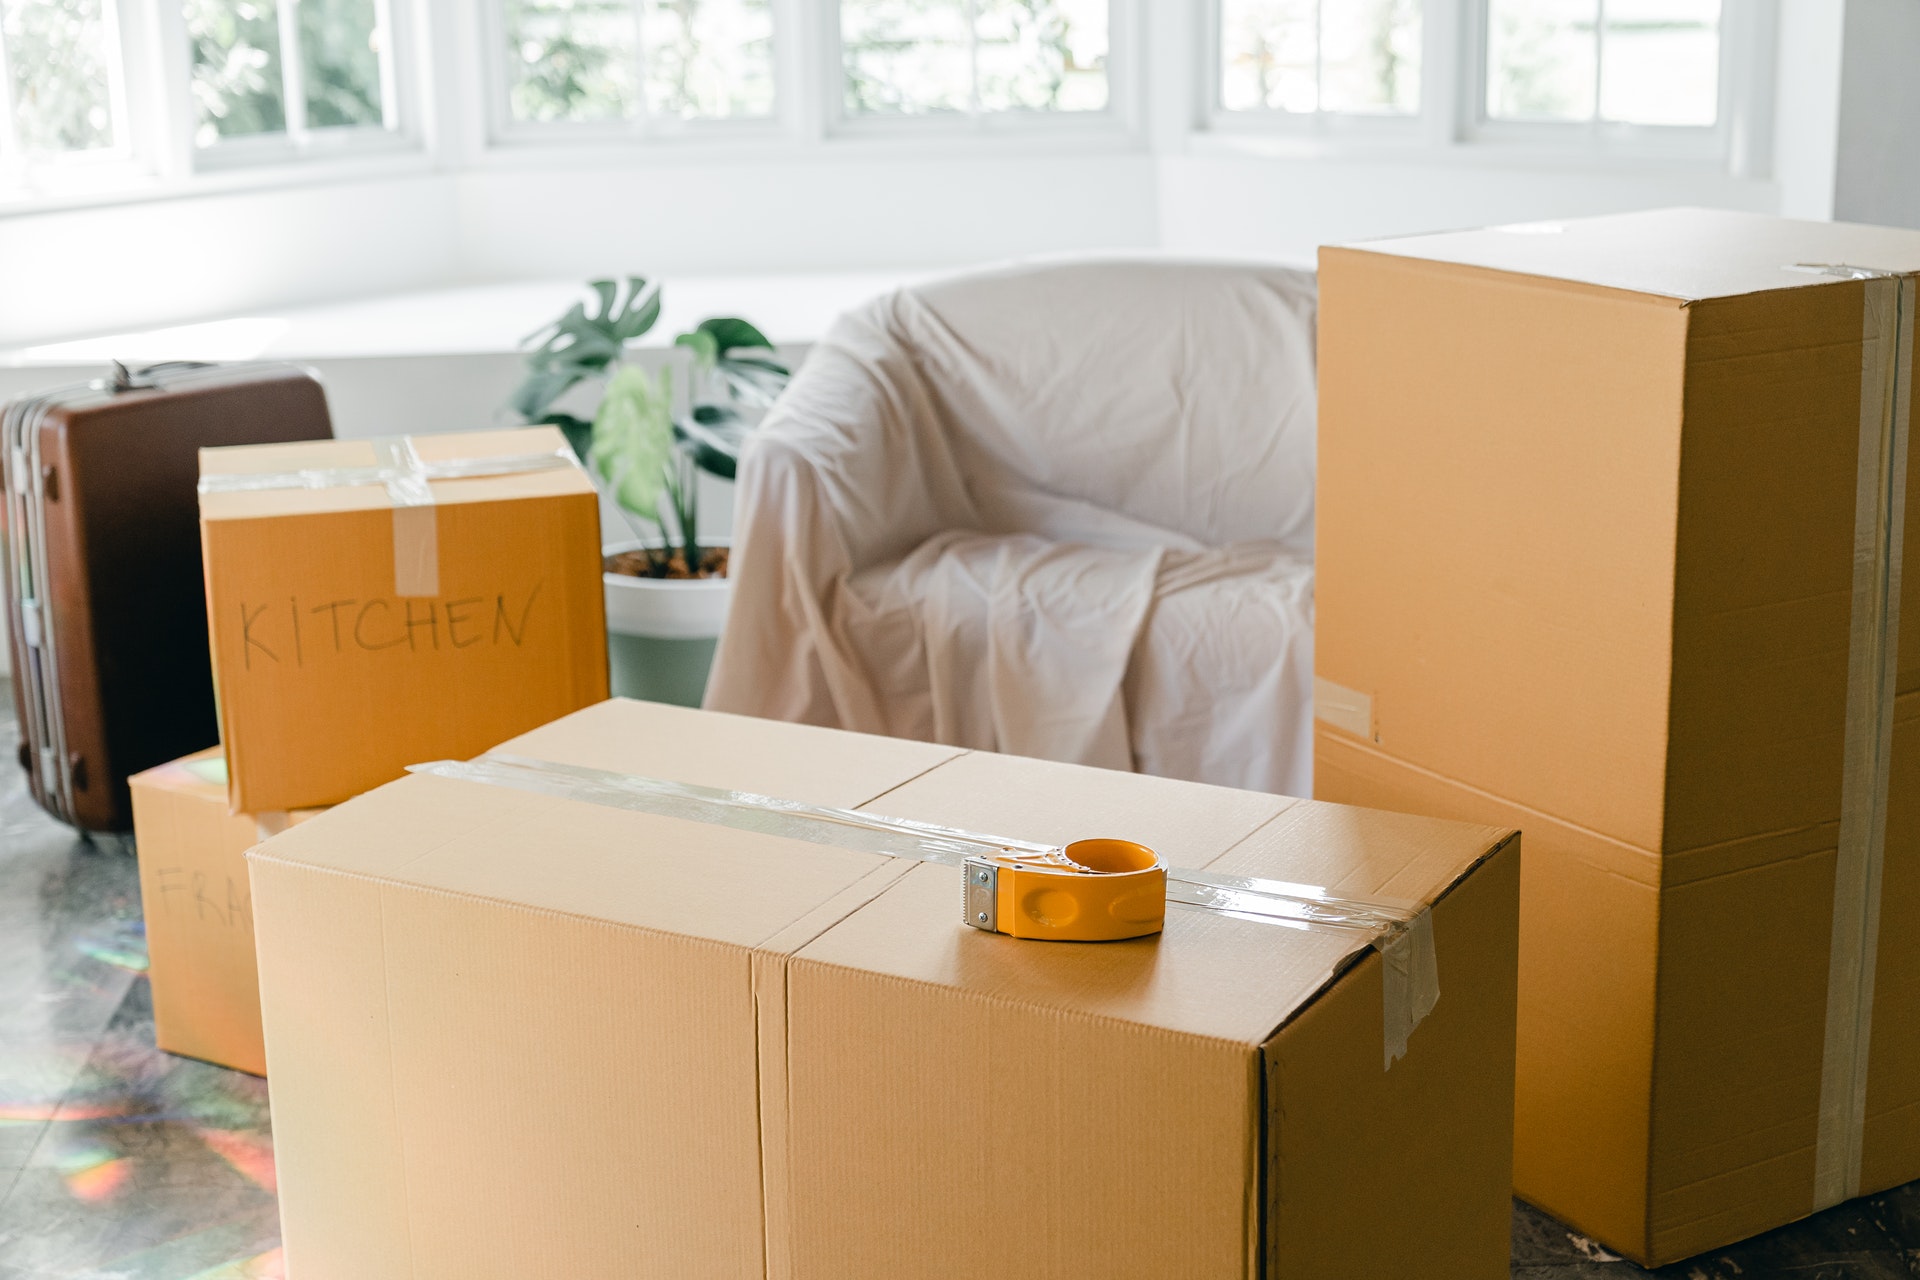 Boxes labelled "Kitchen" next to a suitcase and a couch covered in cloth